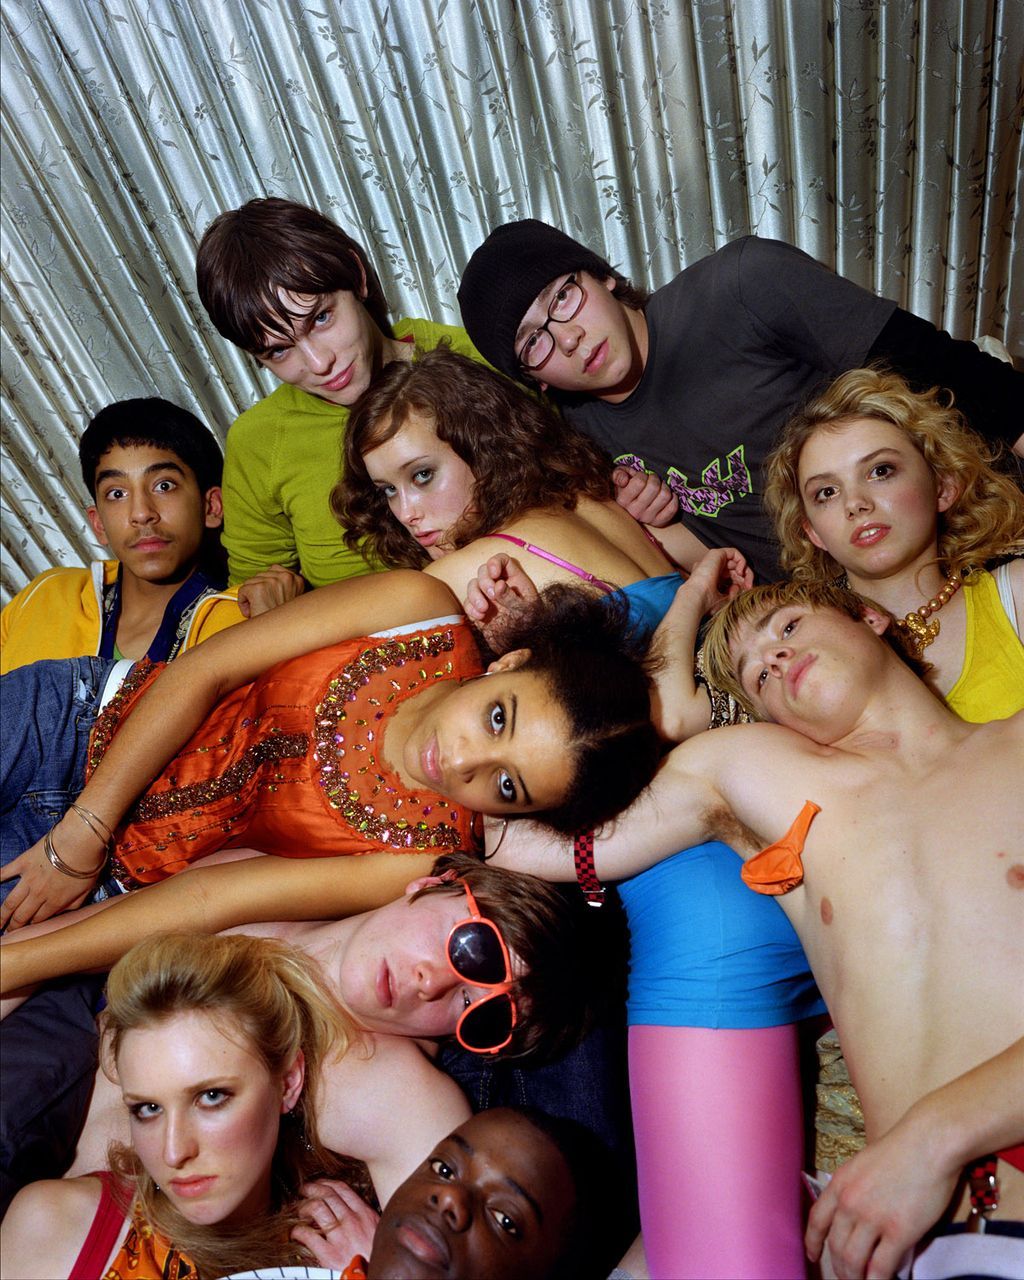 Reasons Why The First Generation Of Skins Really Was The Best Ever. Skins uk, Skin, Teenage parties